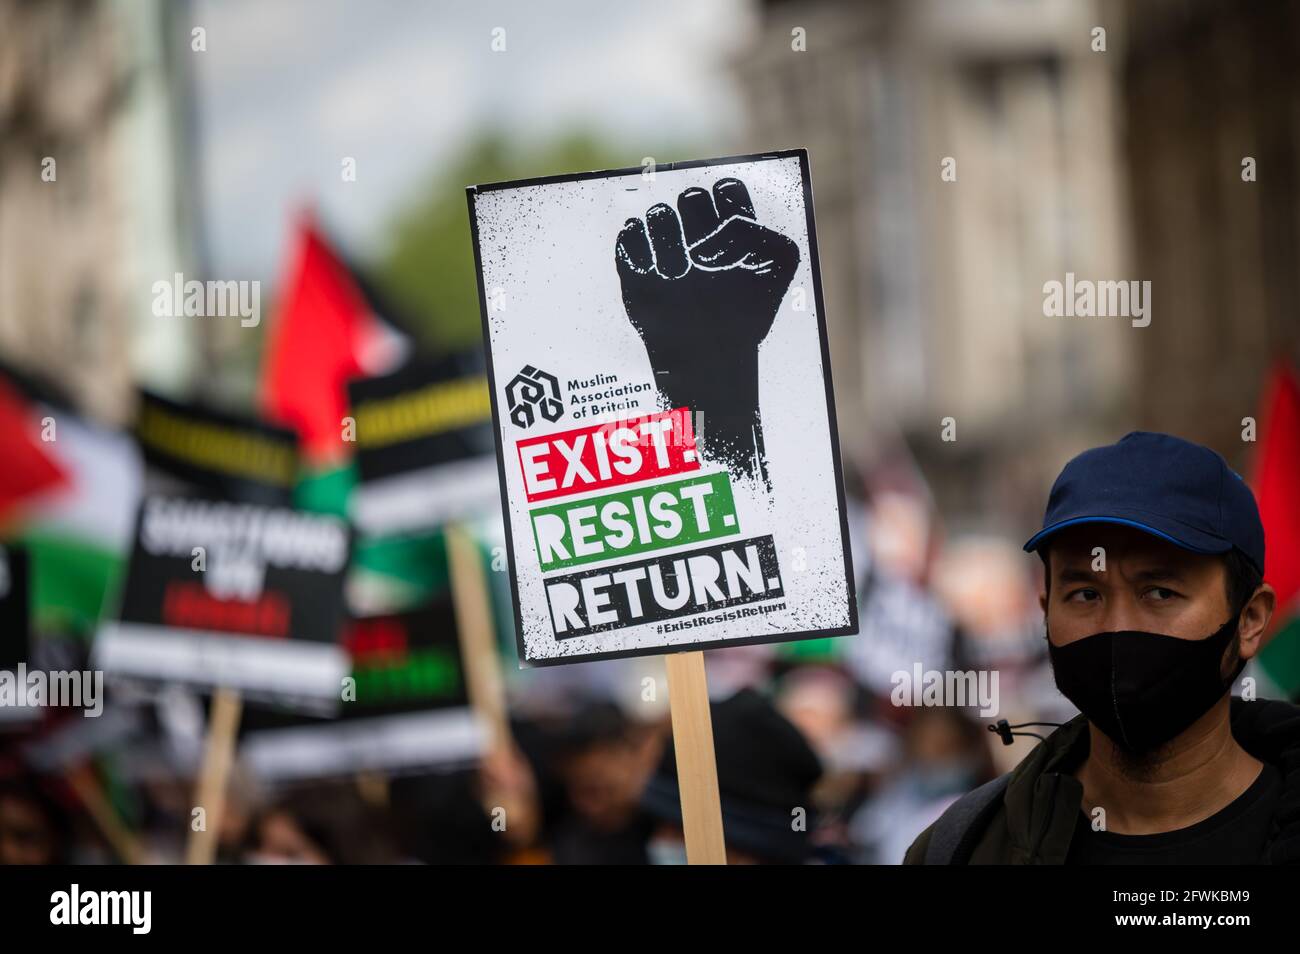 Protesters at the National Demo for Palestine held in London on 22 March 2021, #FreePalestione, London, UK Stock Photo